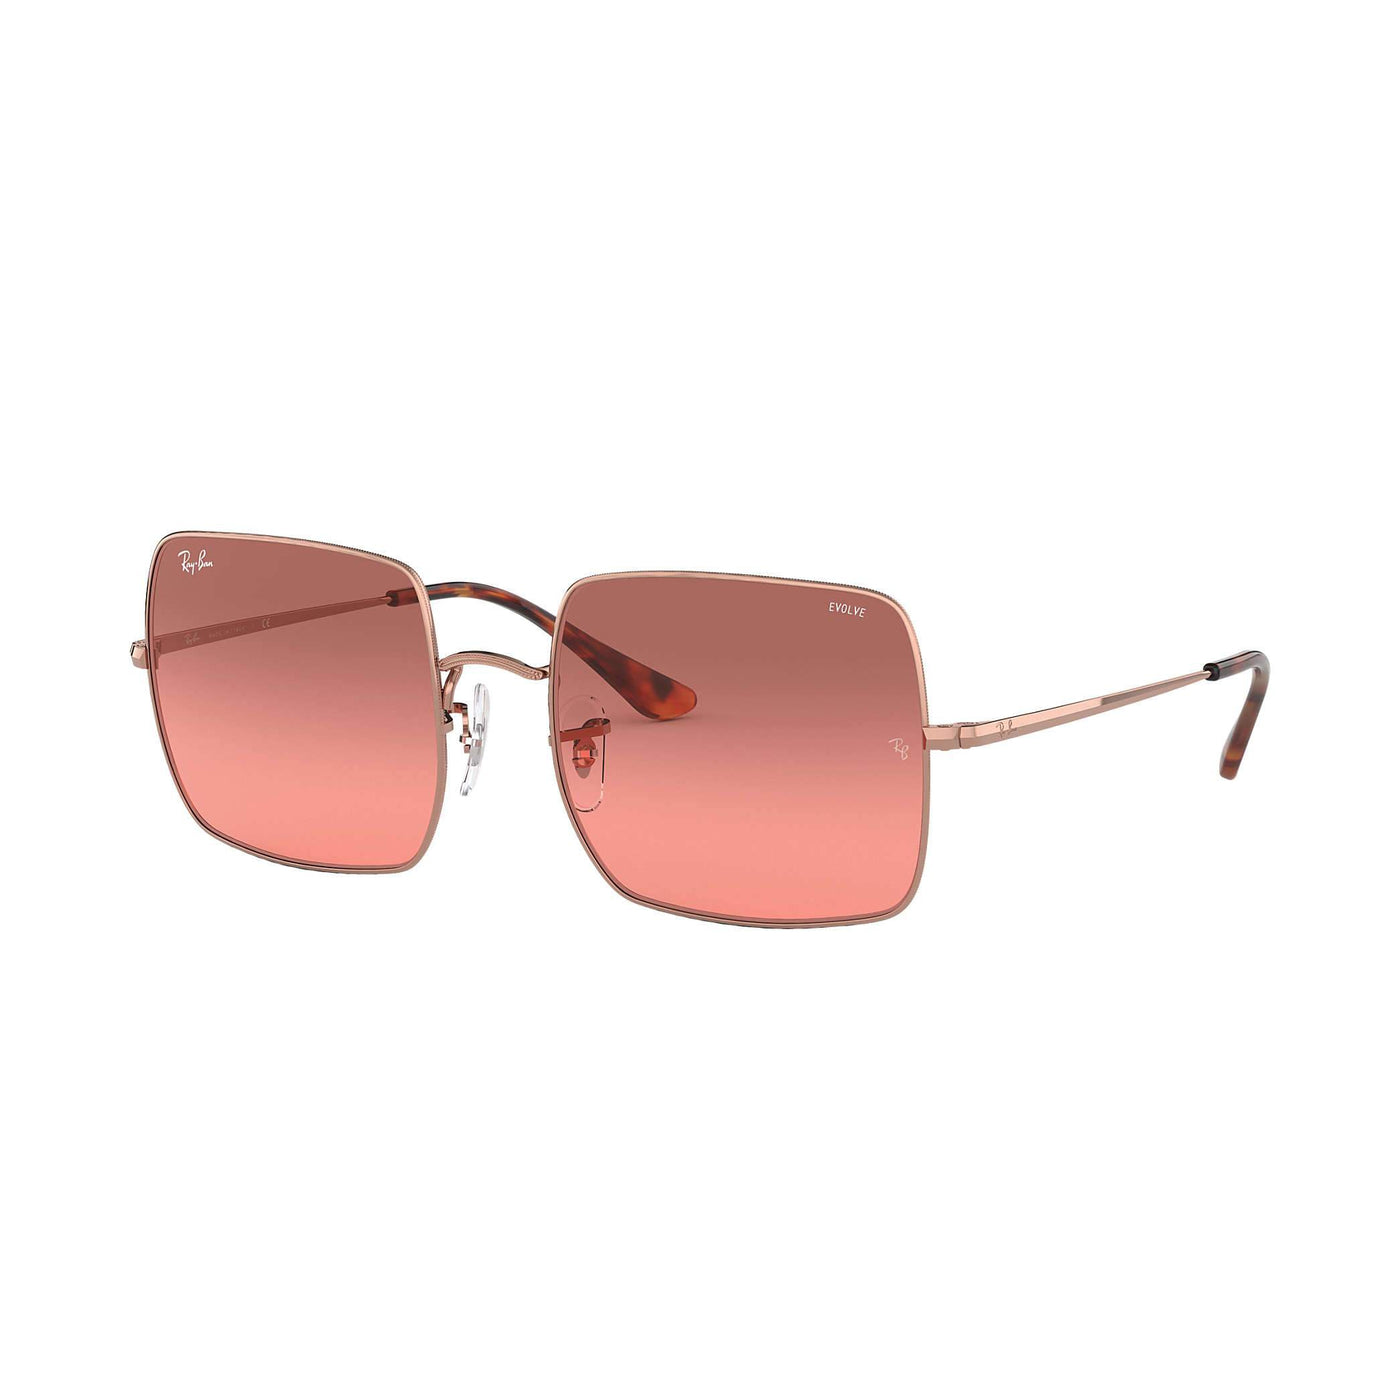 Ray Ban Rectangle 1971 Sunglasses-SUNGLASSES-Bronze-Copper-Red Photochromic Evolve-Kevin's Fine Outdoor Gear & Apparel